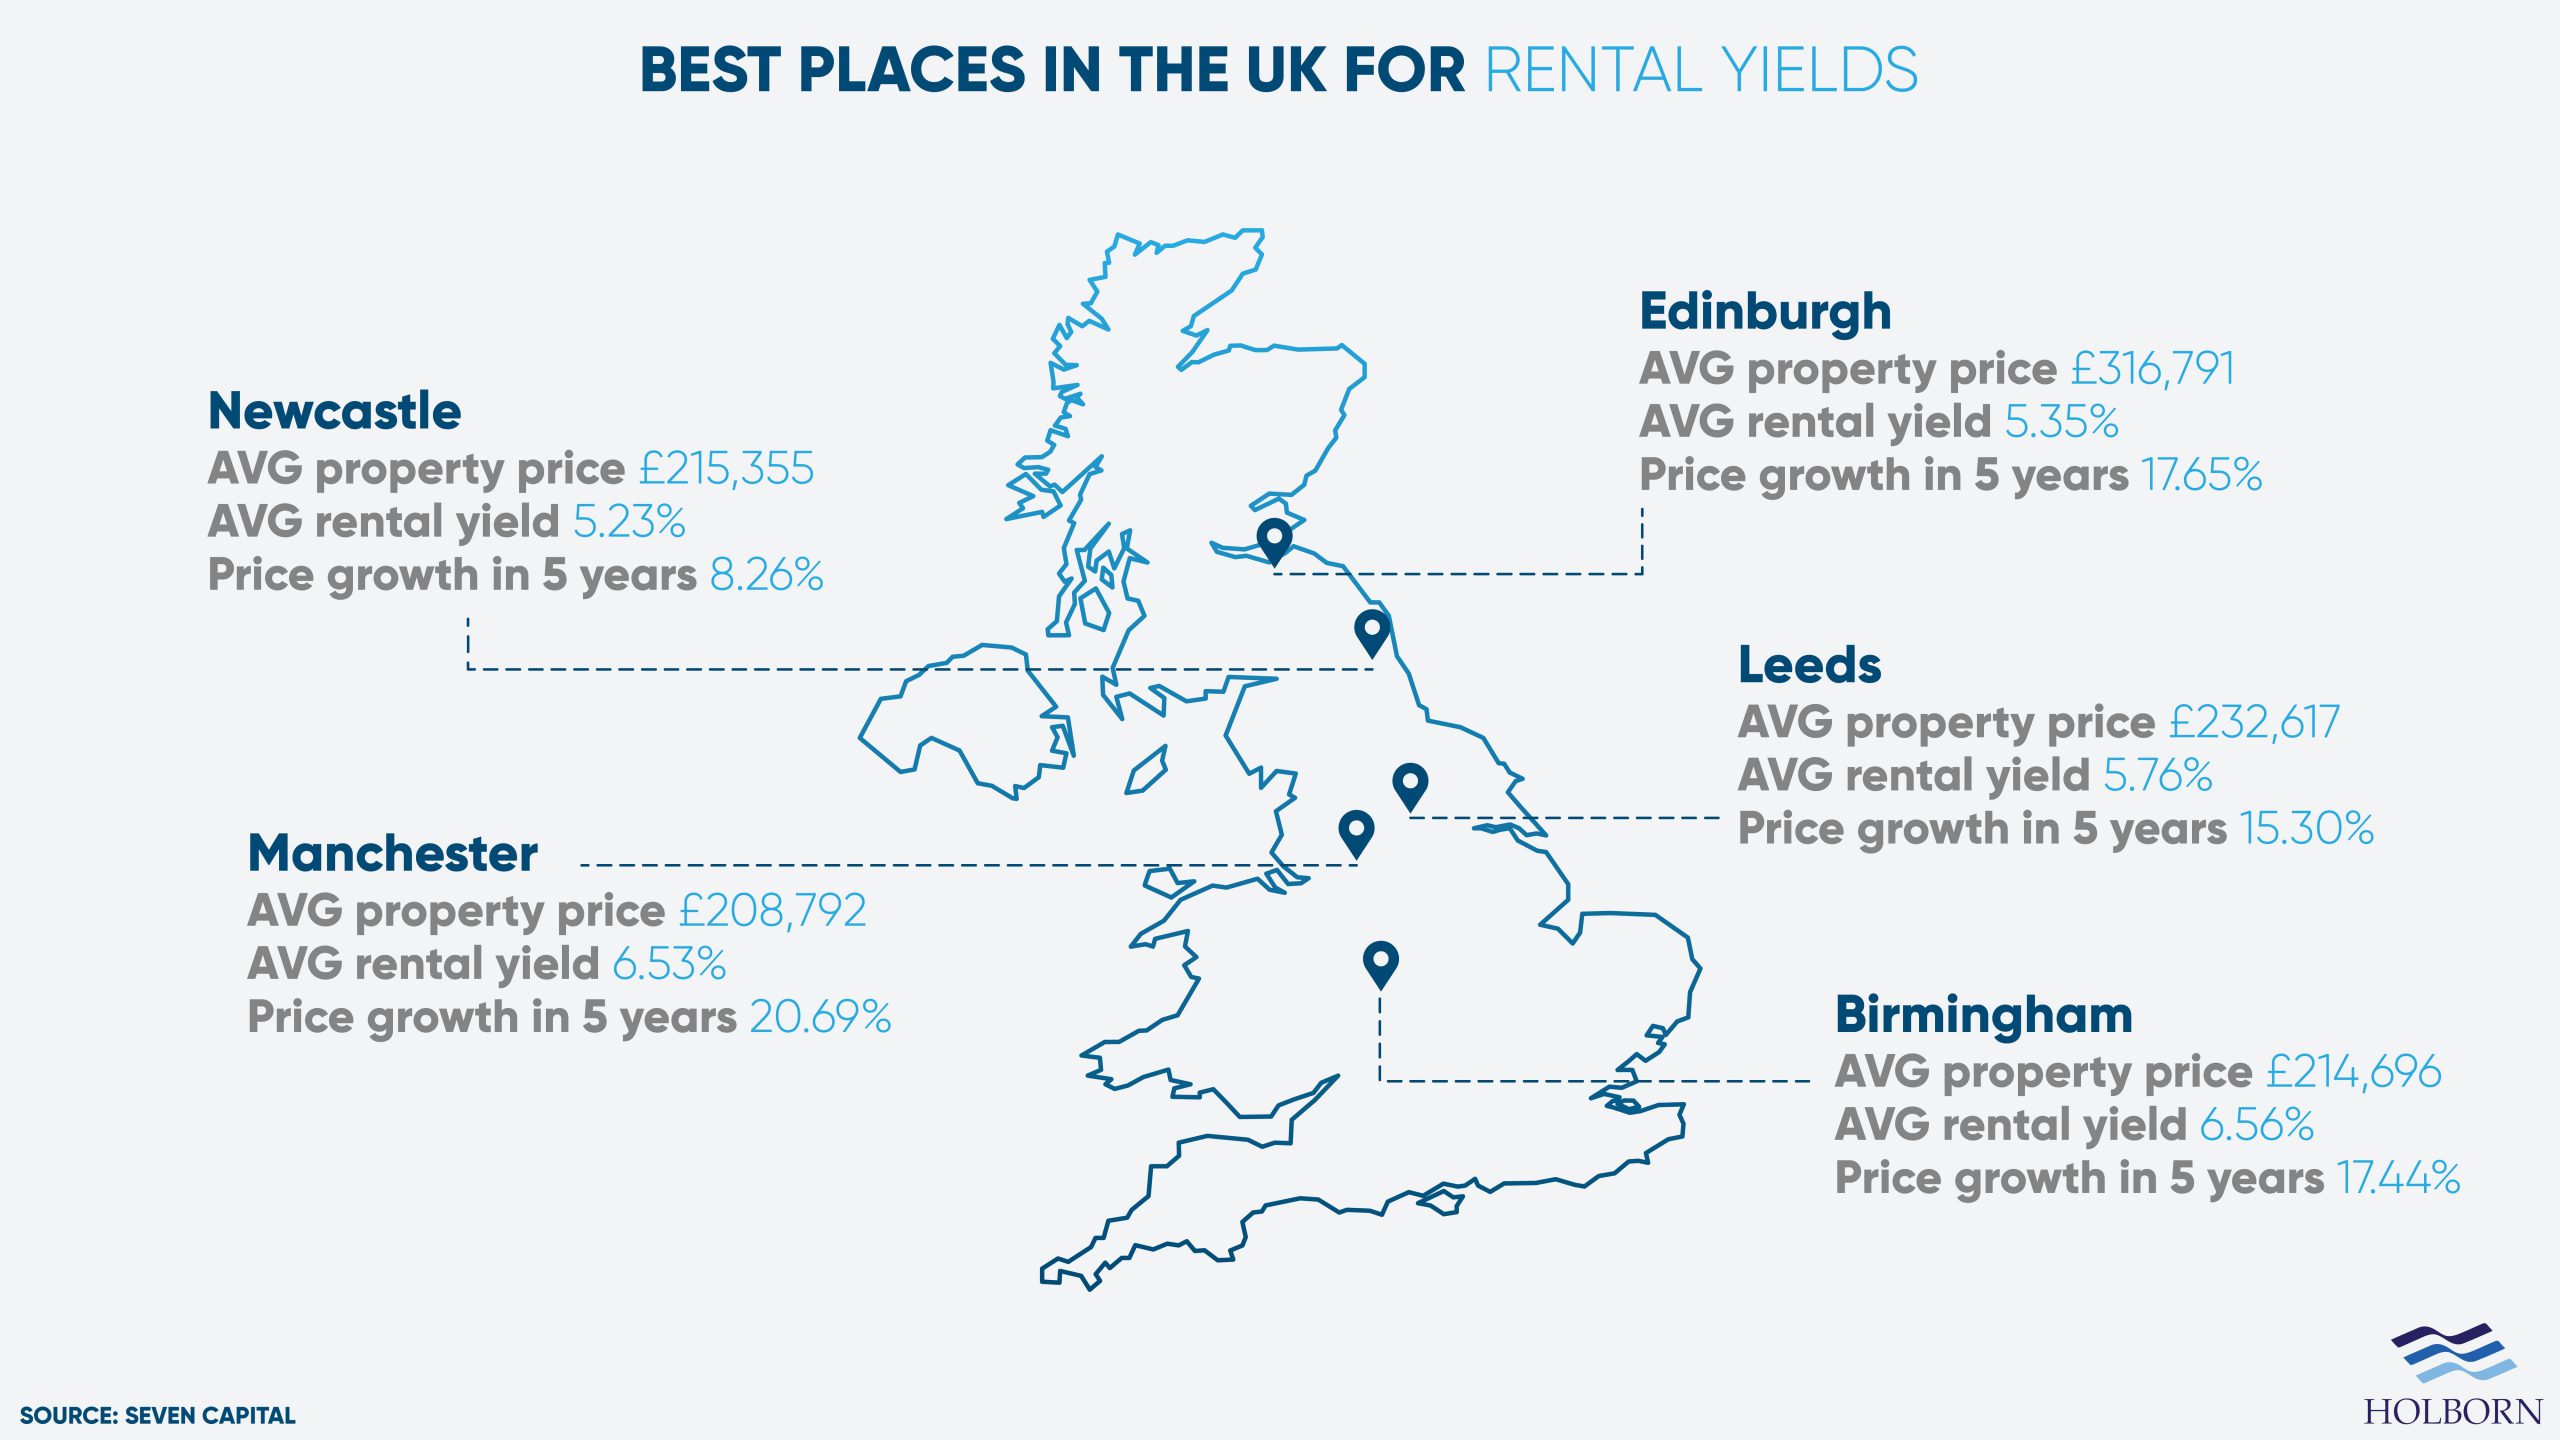 Buy-to-let investment rental yields